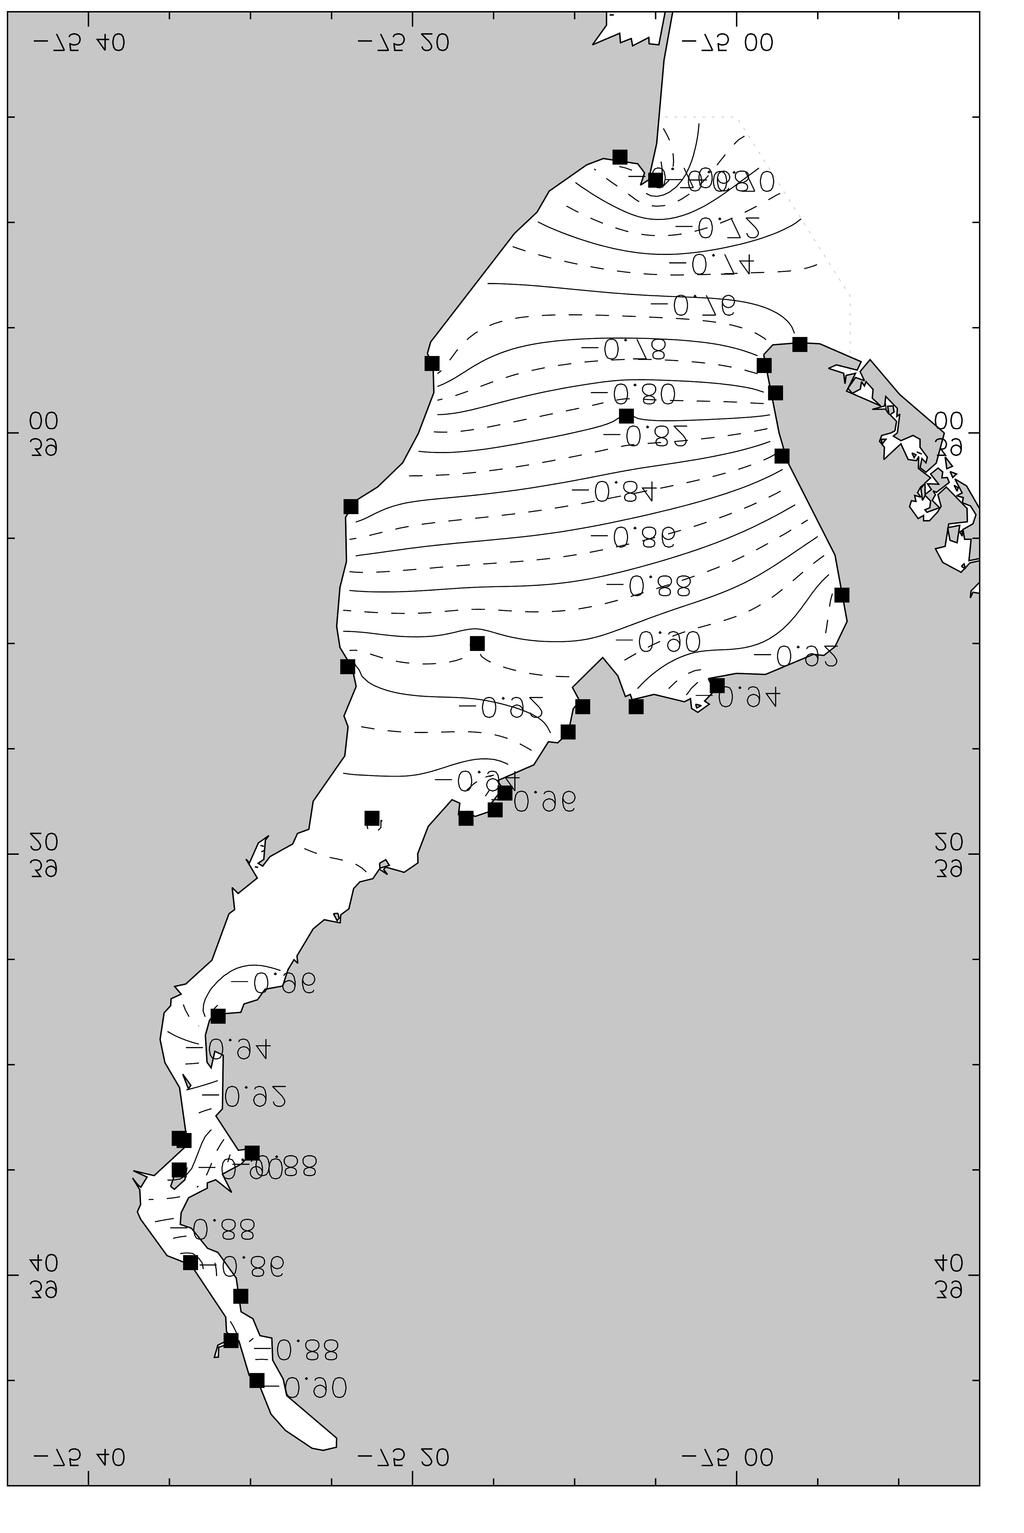 Center, was then used to select cells that represent water (Figure 4). Tidal data at 29 water level stations in Delaware and New Jersey were used (Figure 4).